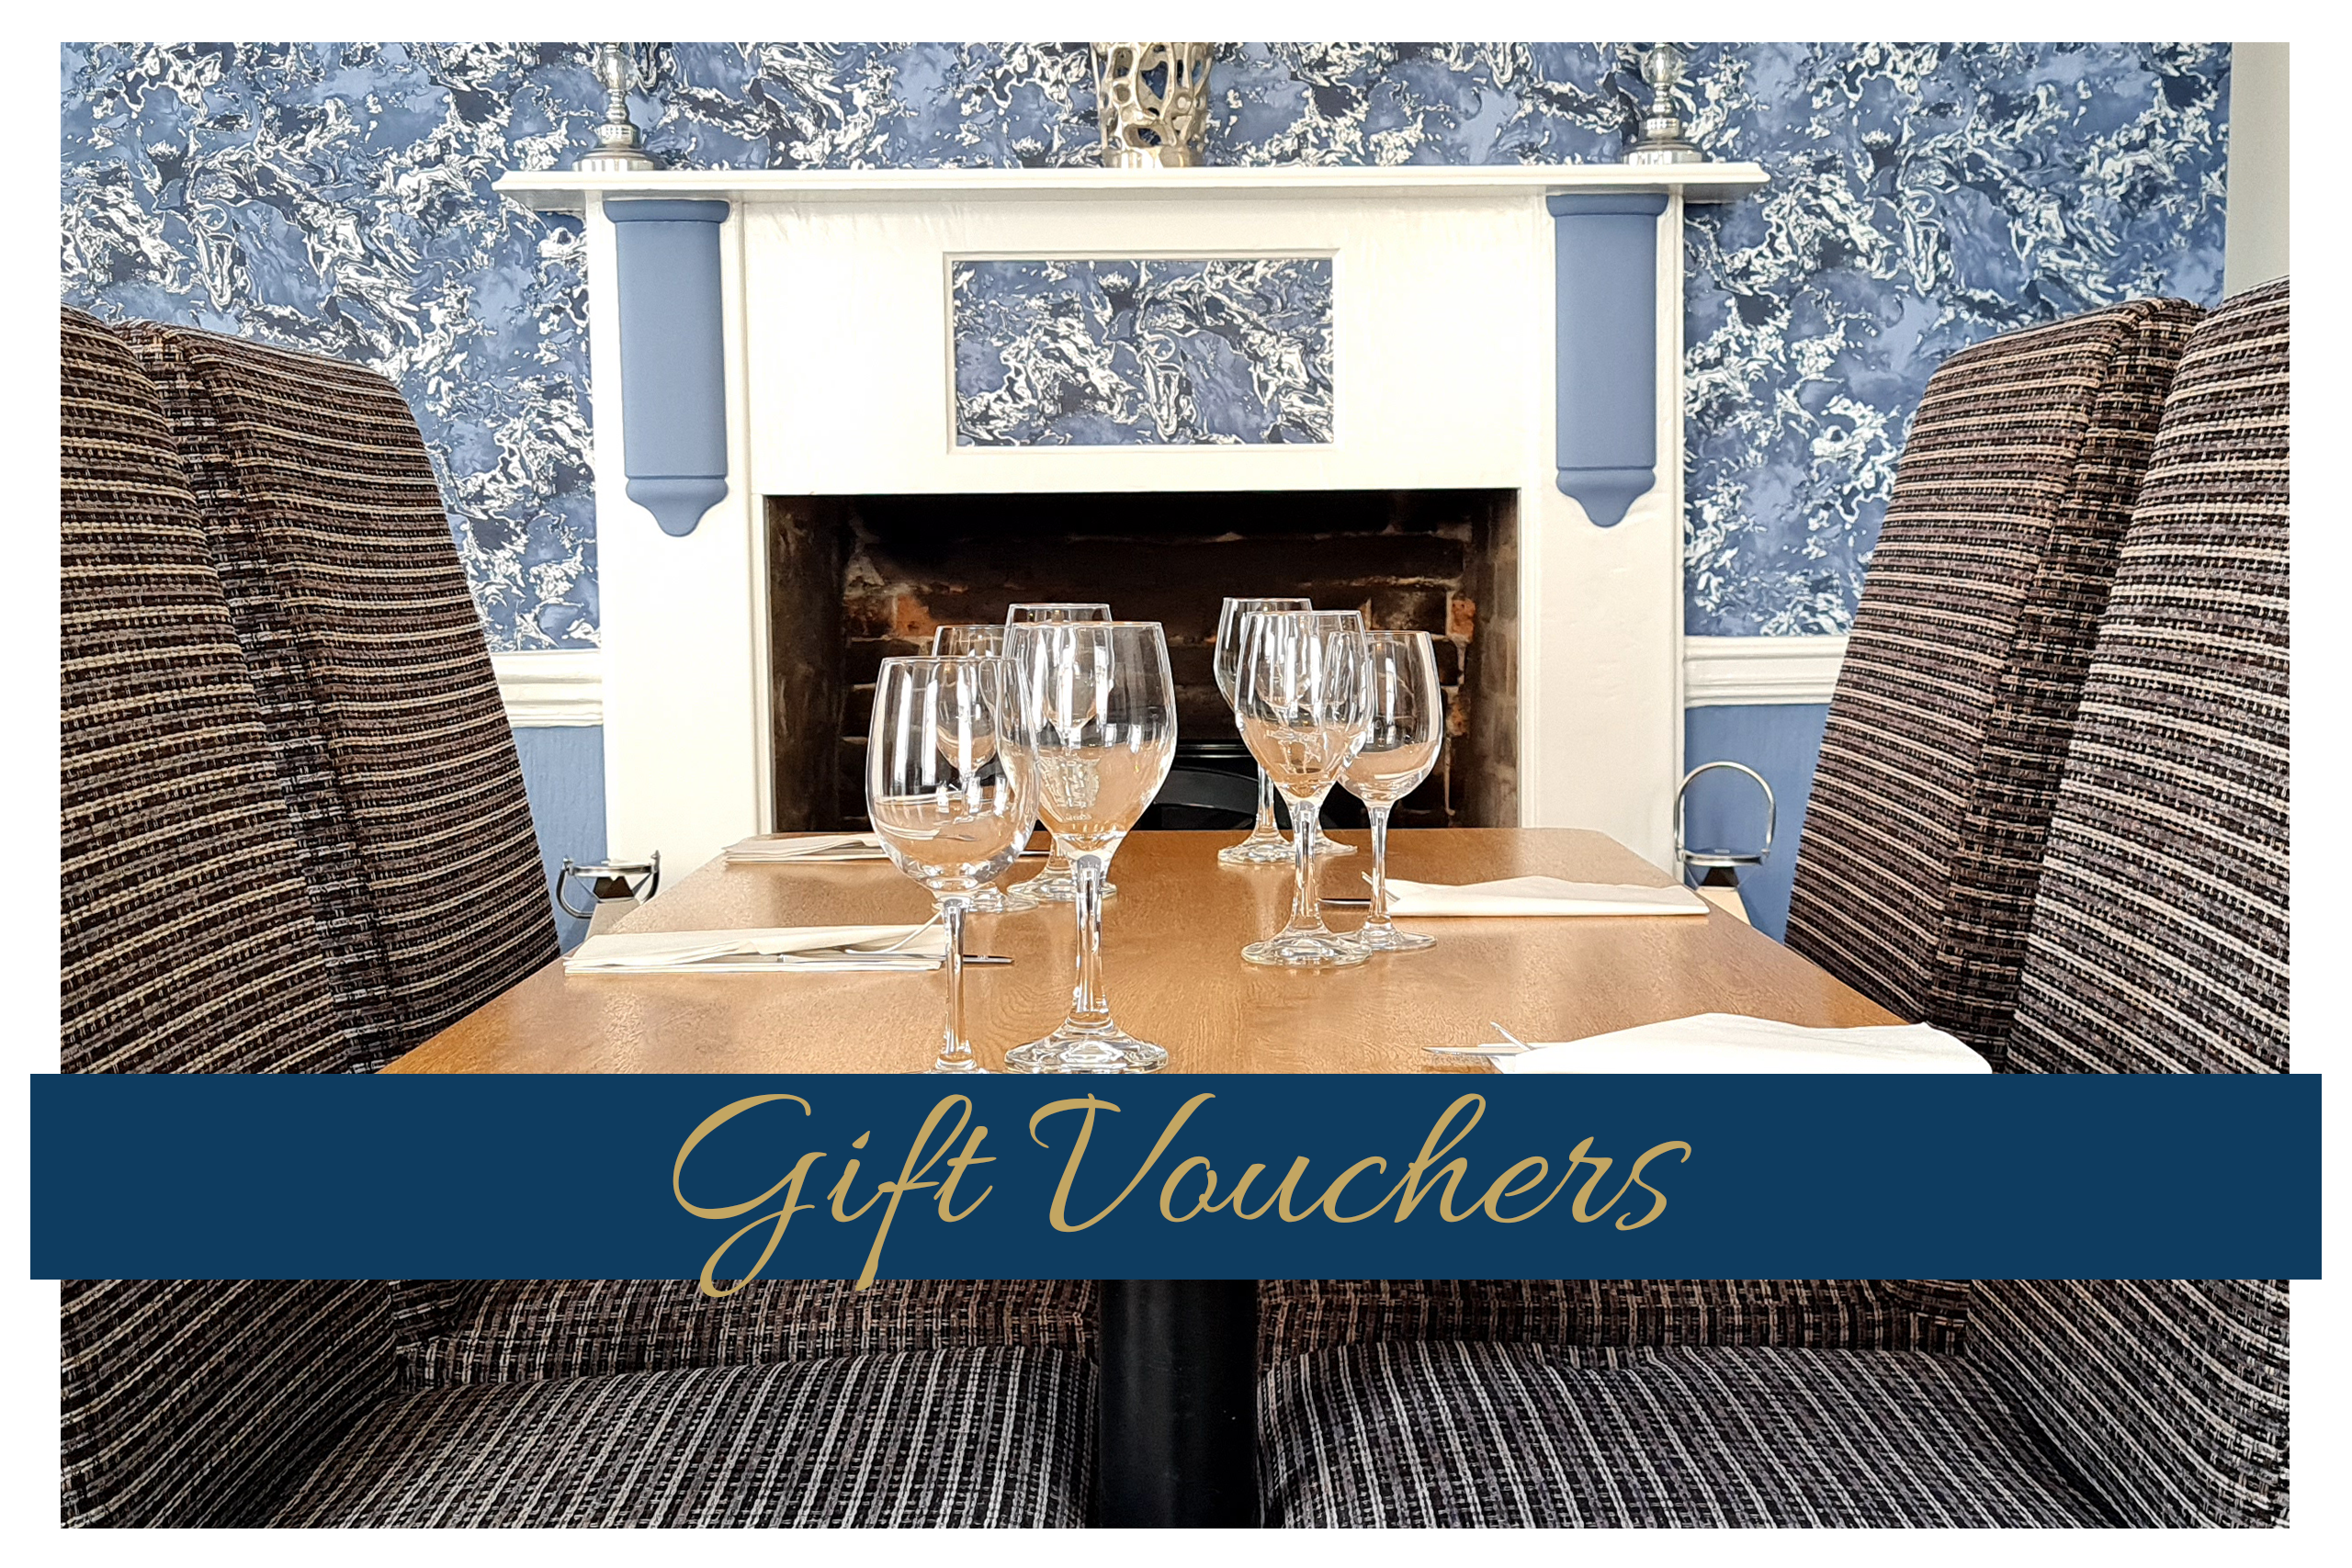 Buy Gift Voucher for Chartists 1770, brand new mid wales restaurant